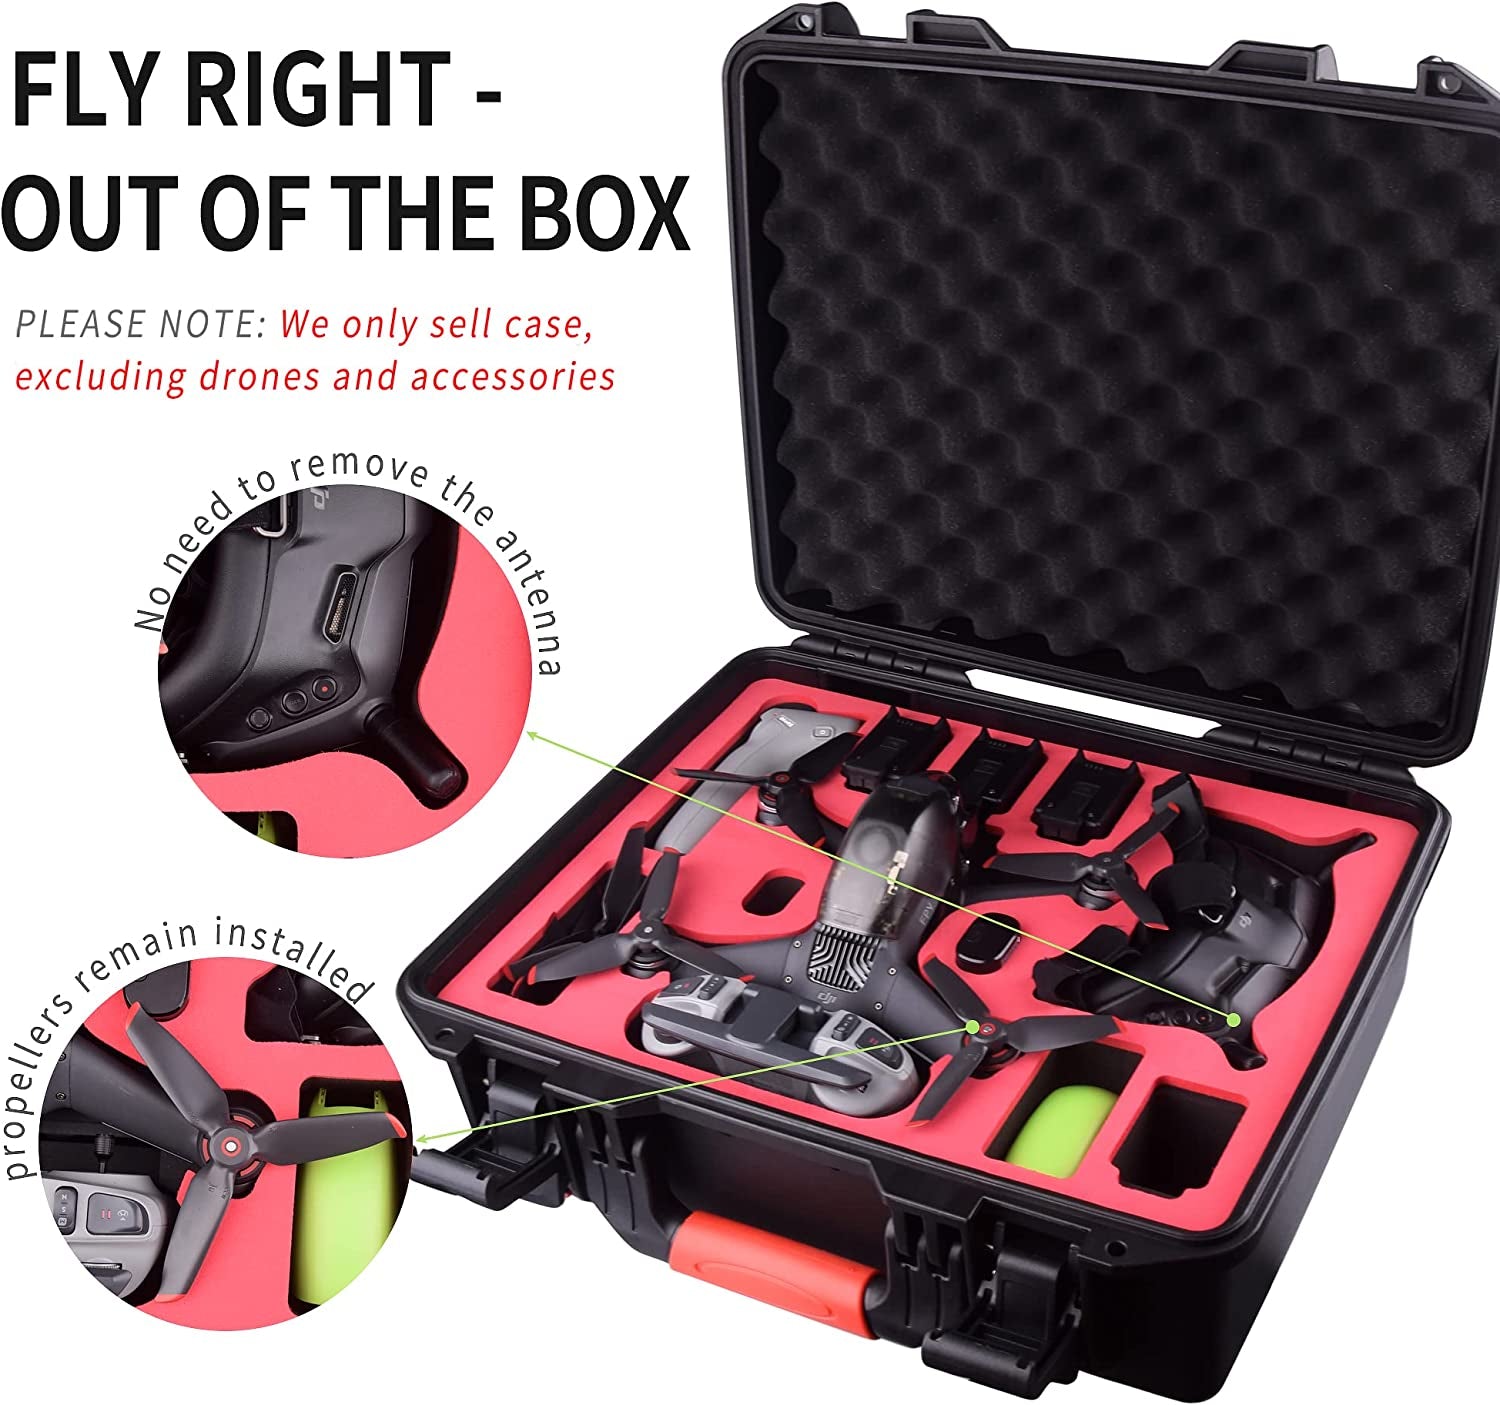 Professional Carrying Hard Case for DJI FPV and Accessories - Fits 6 Batteries - Keep Props On